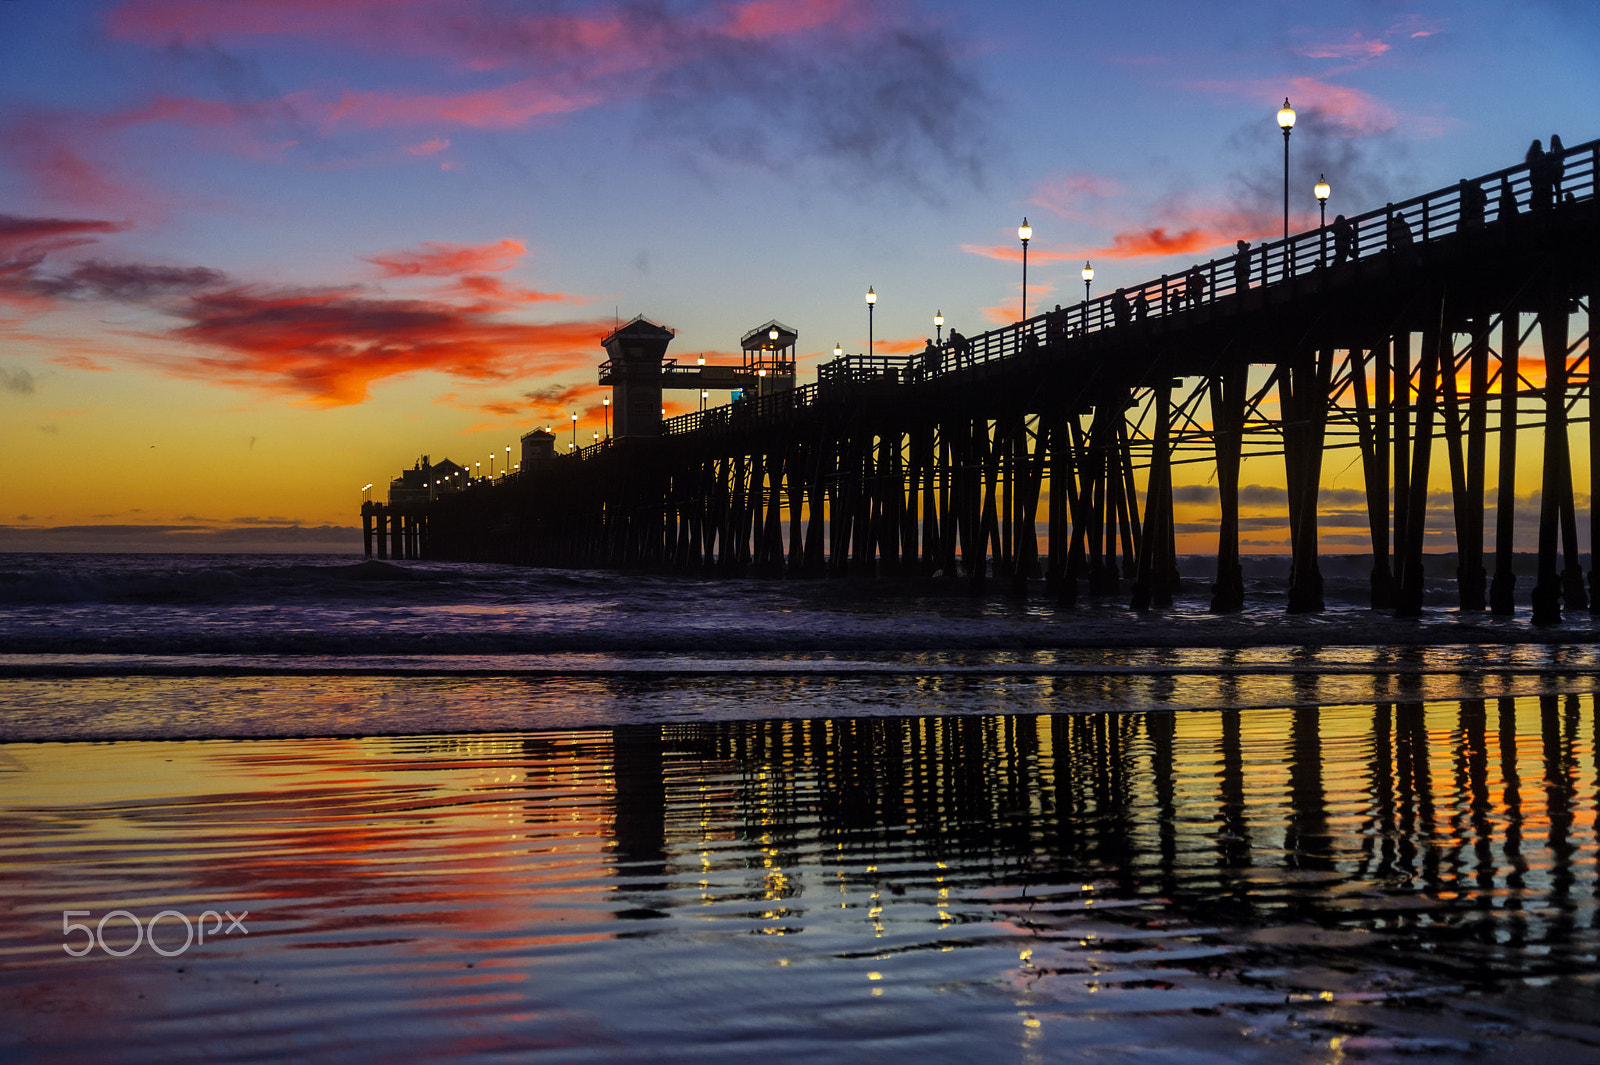 Nikon D3S sample photo. The oceanside pier at sunset - october 16, 2016 photography